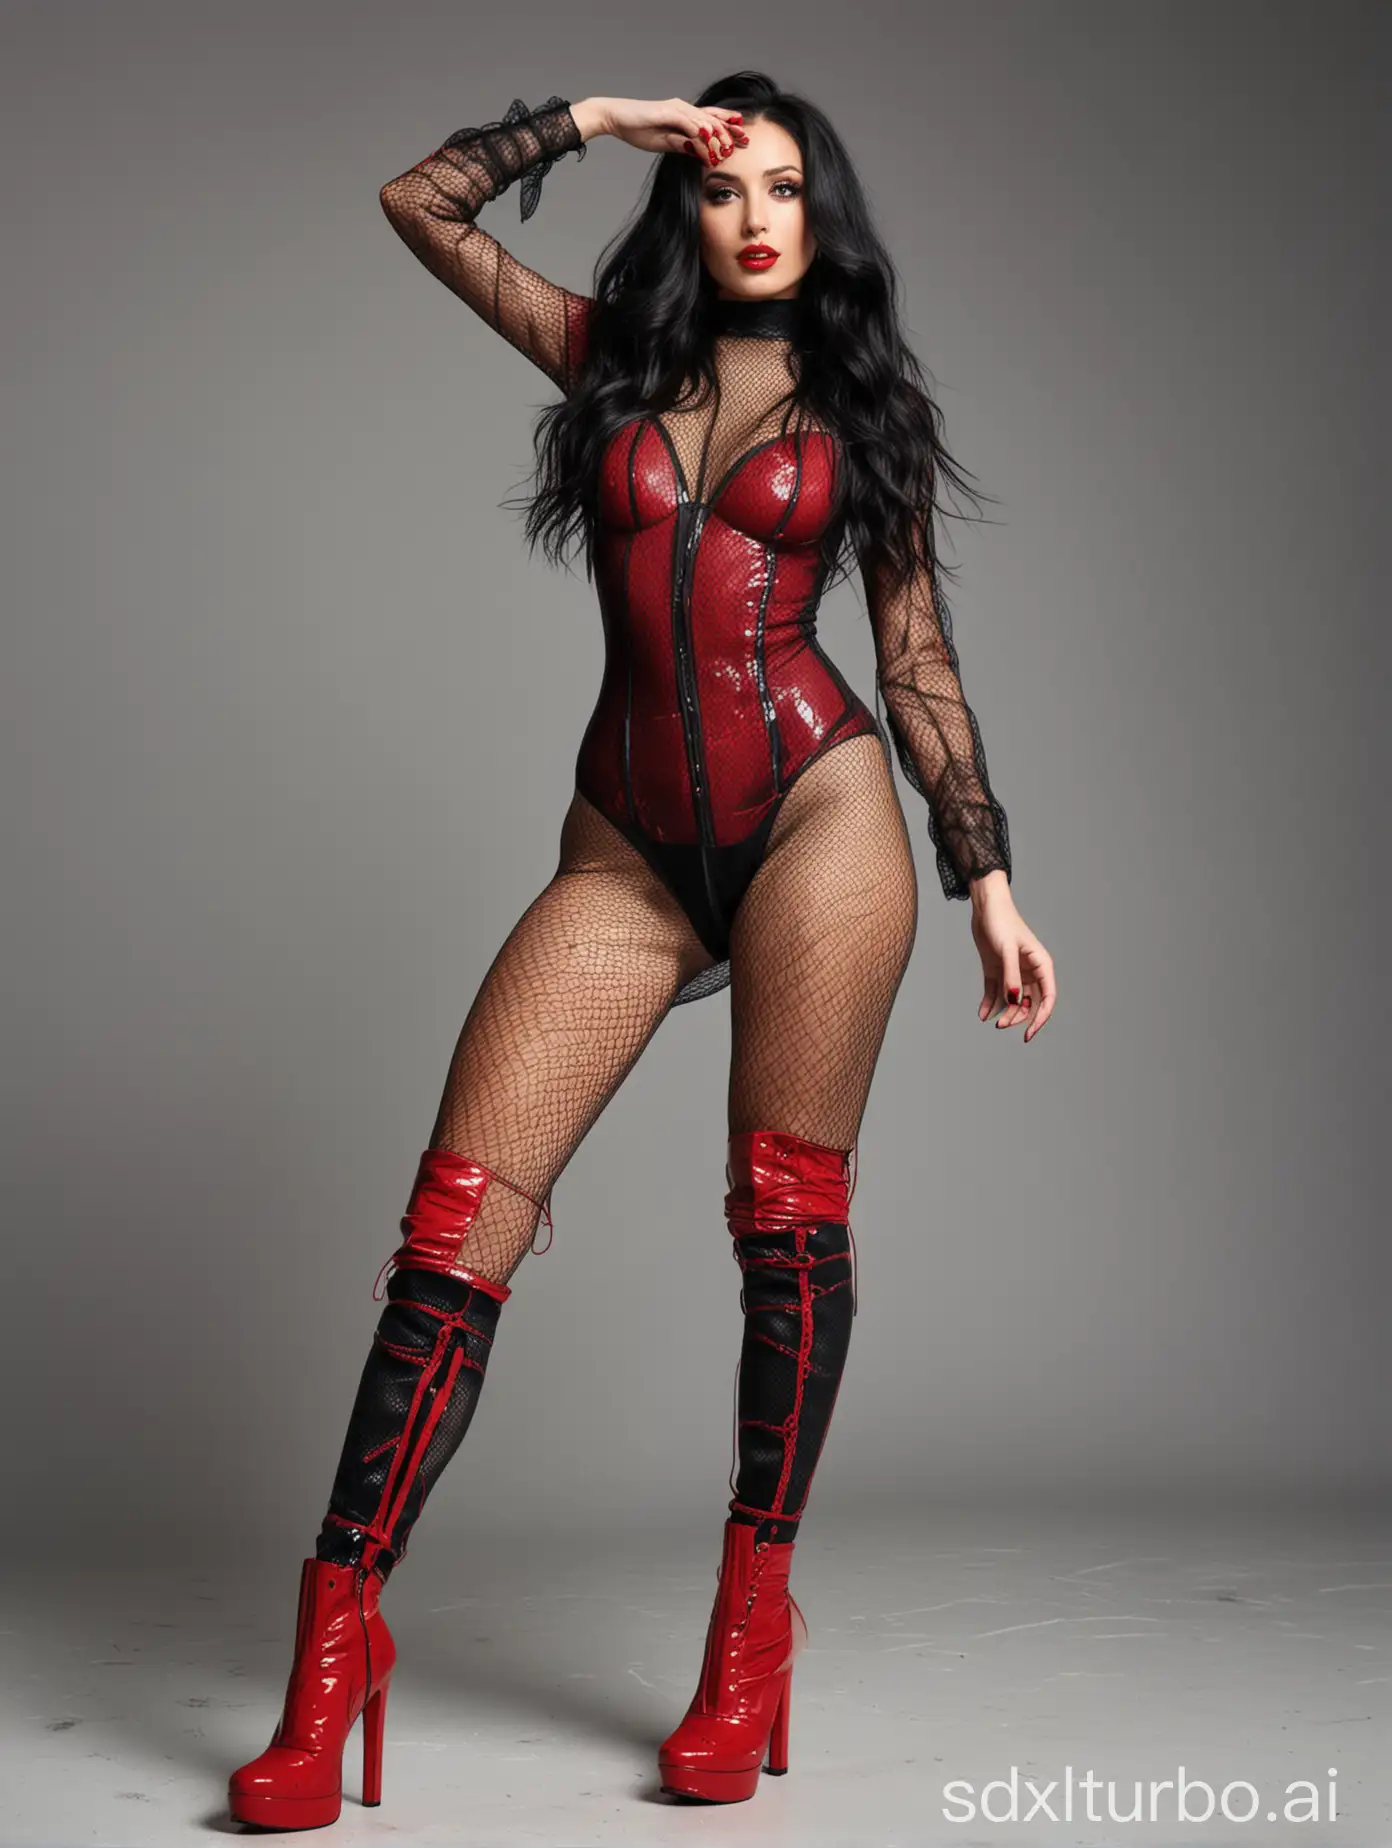 Seductive-Woman-in-Red-HighHeeled-Boots-and-Fishnet-Bodysuit